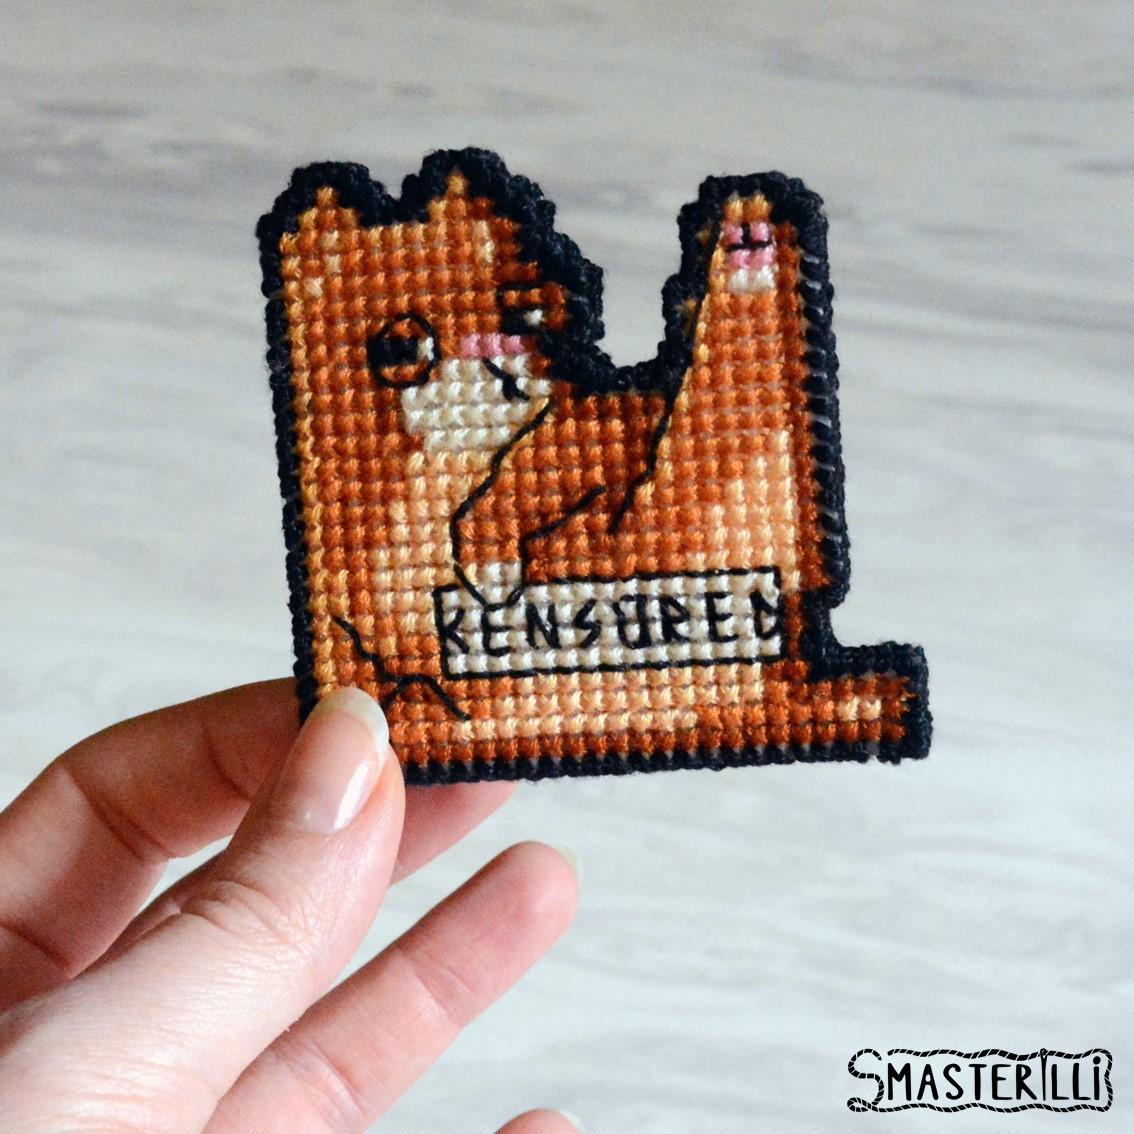 Orange tabby cat corner cross stitch bookmark: pattern and tutorial for plastic canvas PDF by Smasterilli. Digital cross stitch pattern for instant download. Cat Lover's Gift idea for handmade craft. Plastic Canvas Project. Book Lover's Craft